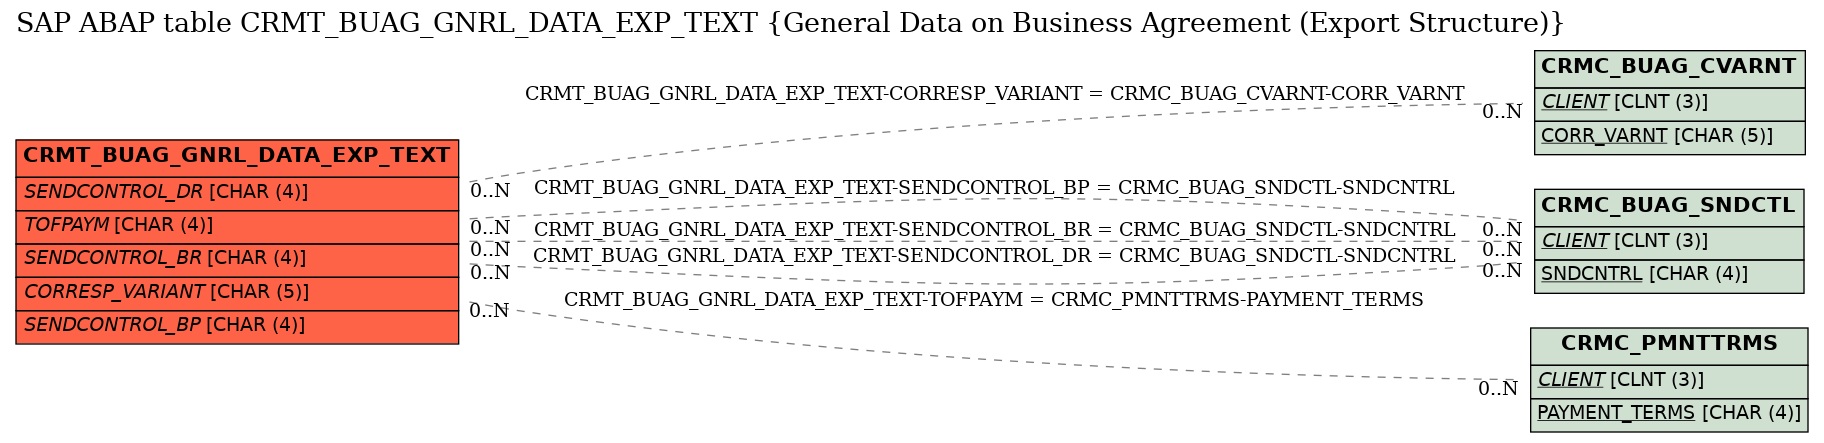 E-R Diagram for table CRMT_BUAG_GNRL_DATA_EXP_TEXT (General Data on Business Agreement (Export Structure))